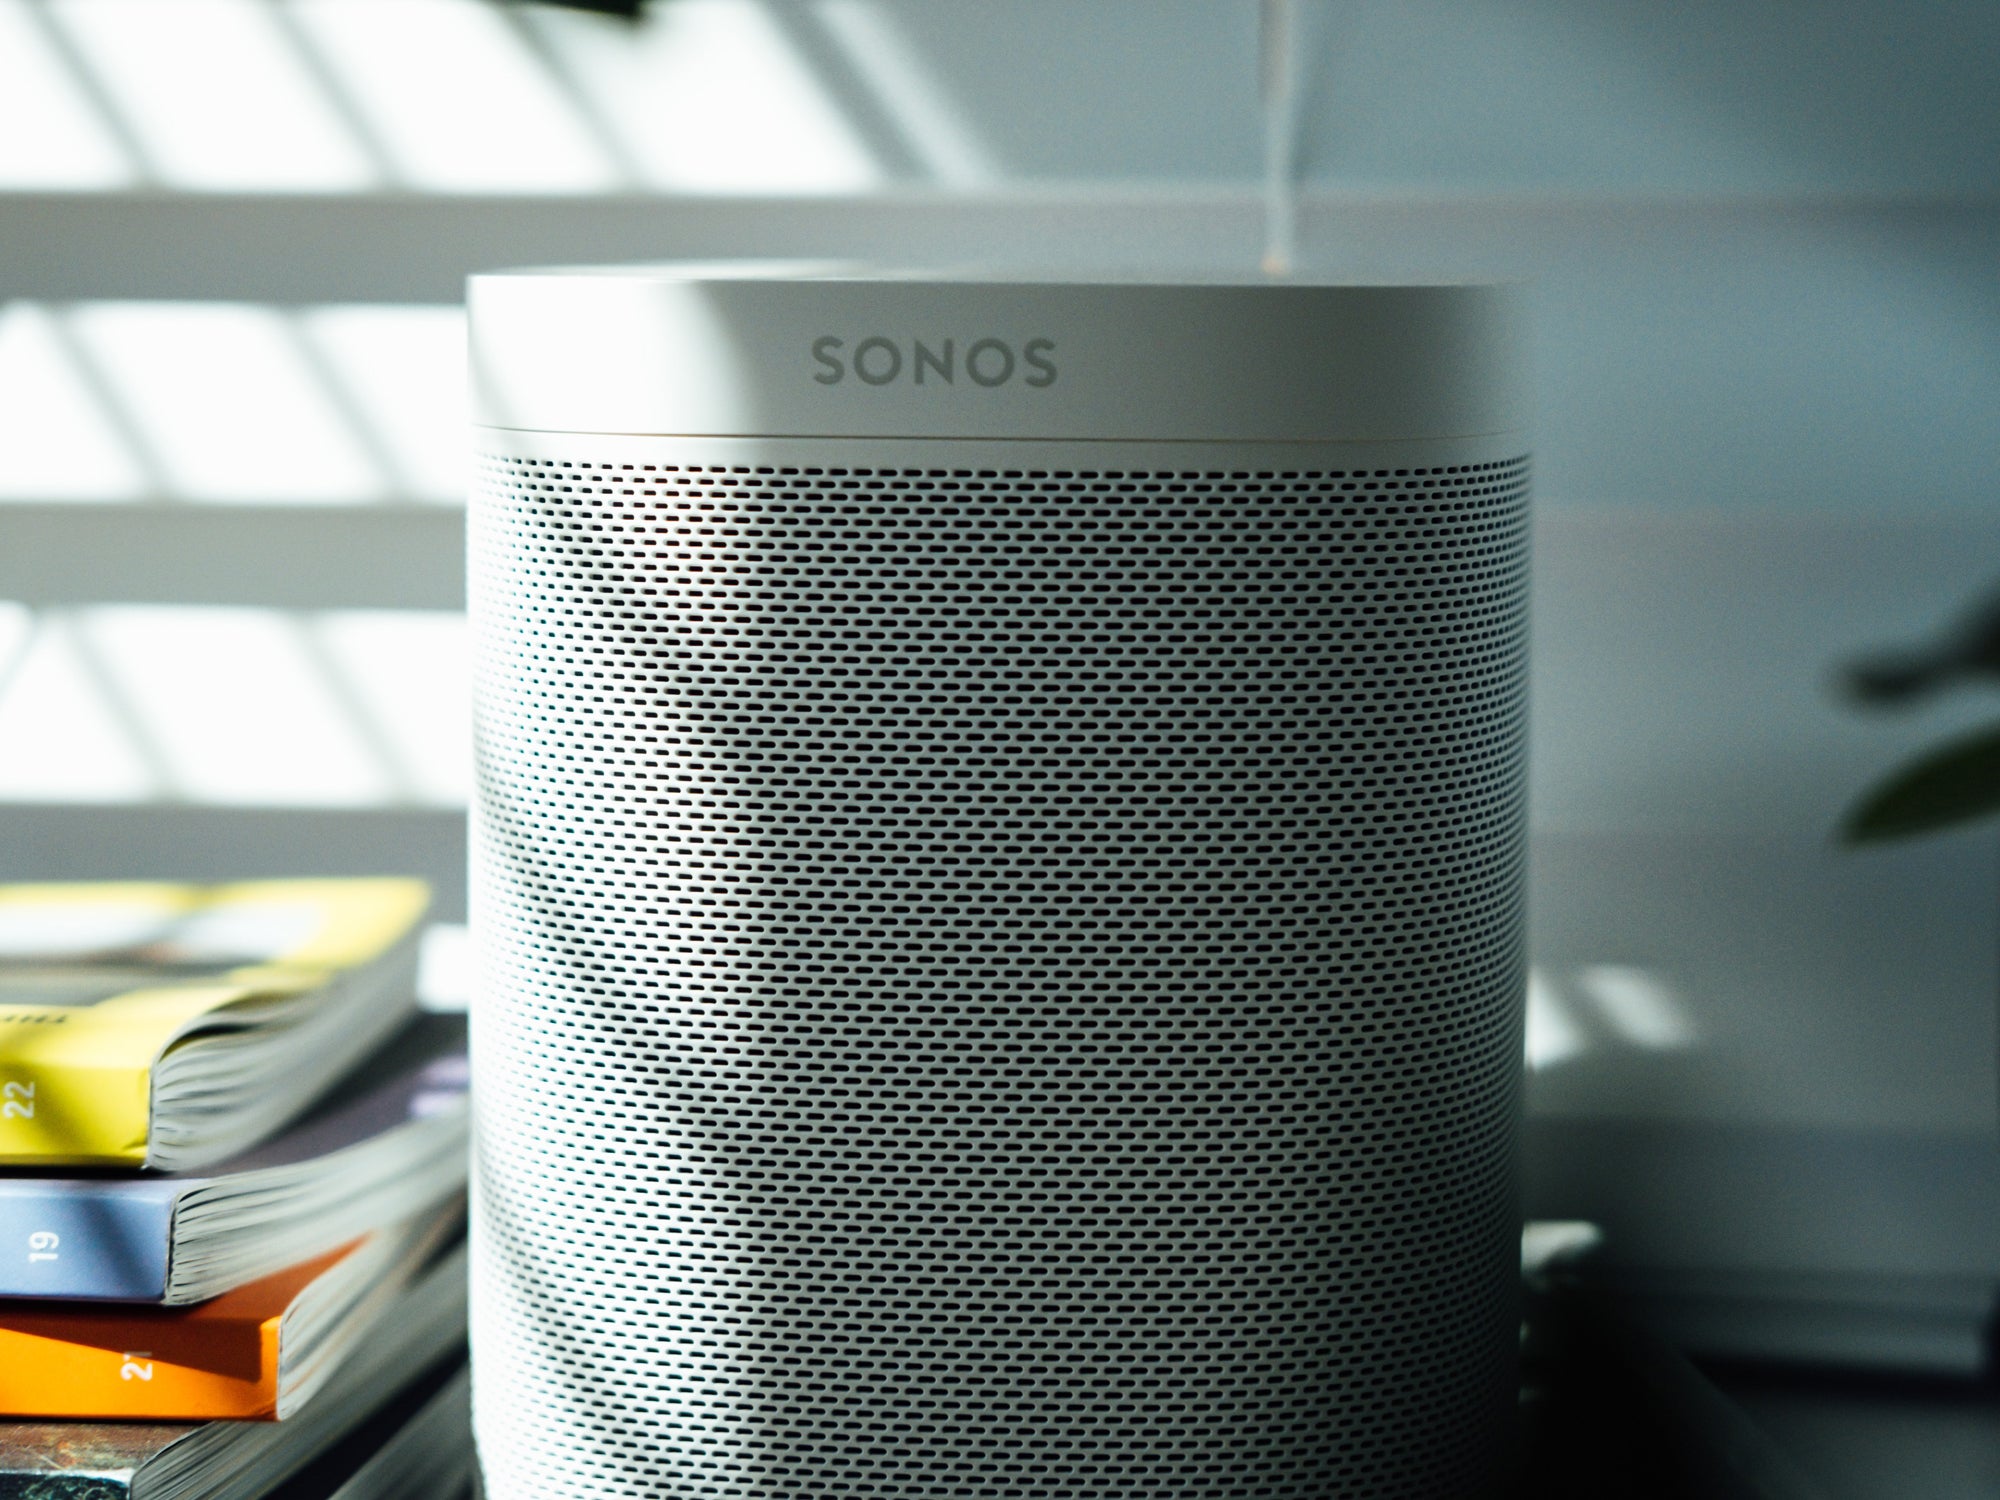 Skynd dig Forgænger tankskib How to control your Sonos speaker with only your voice | Popular Science